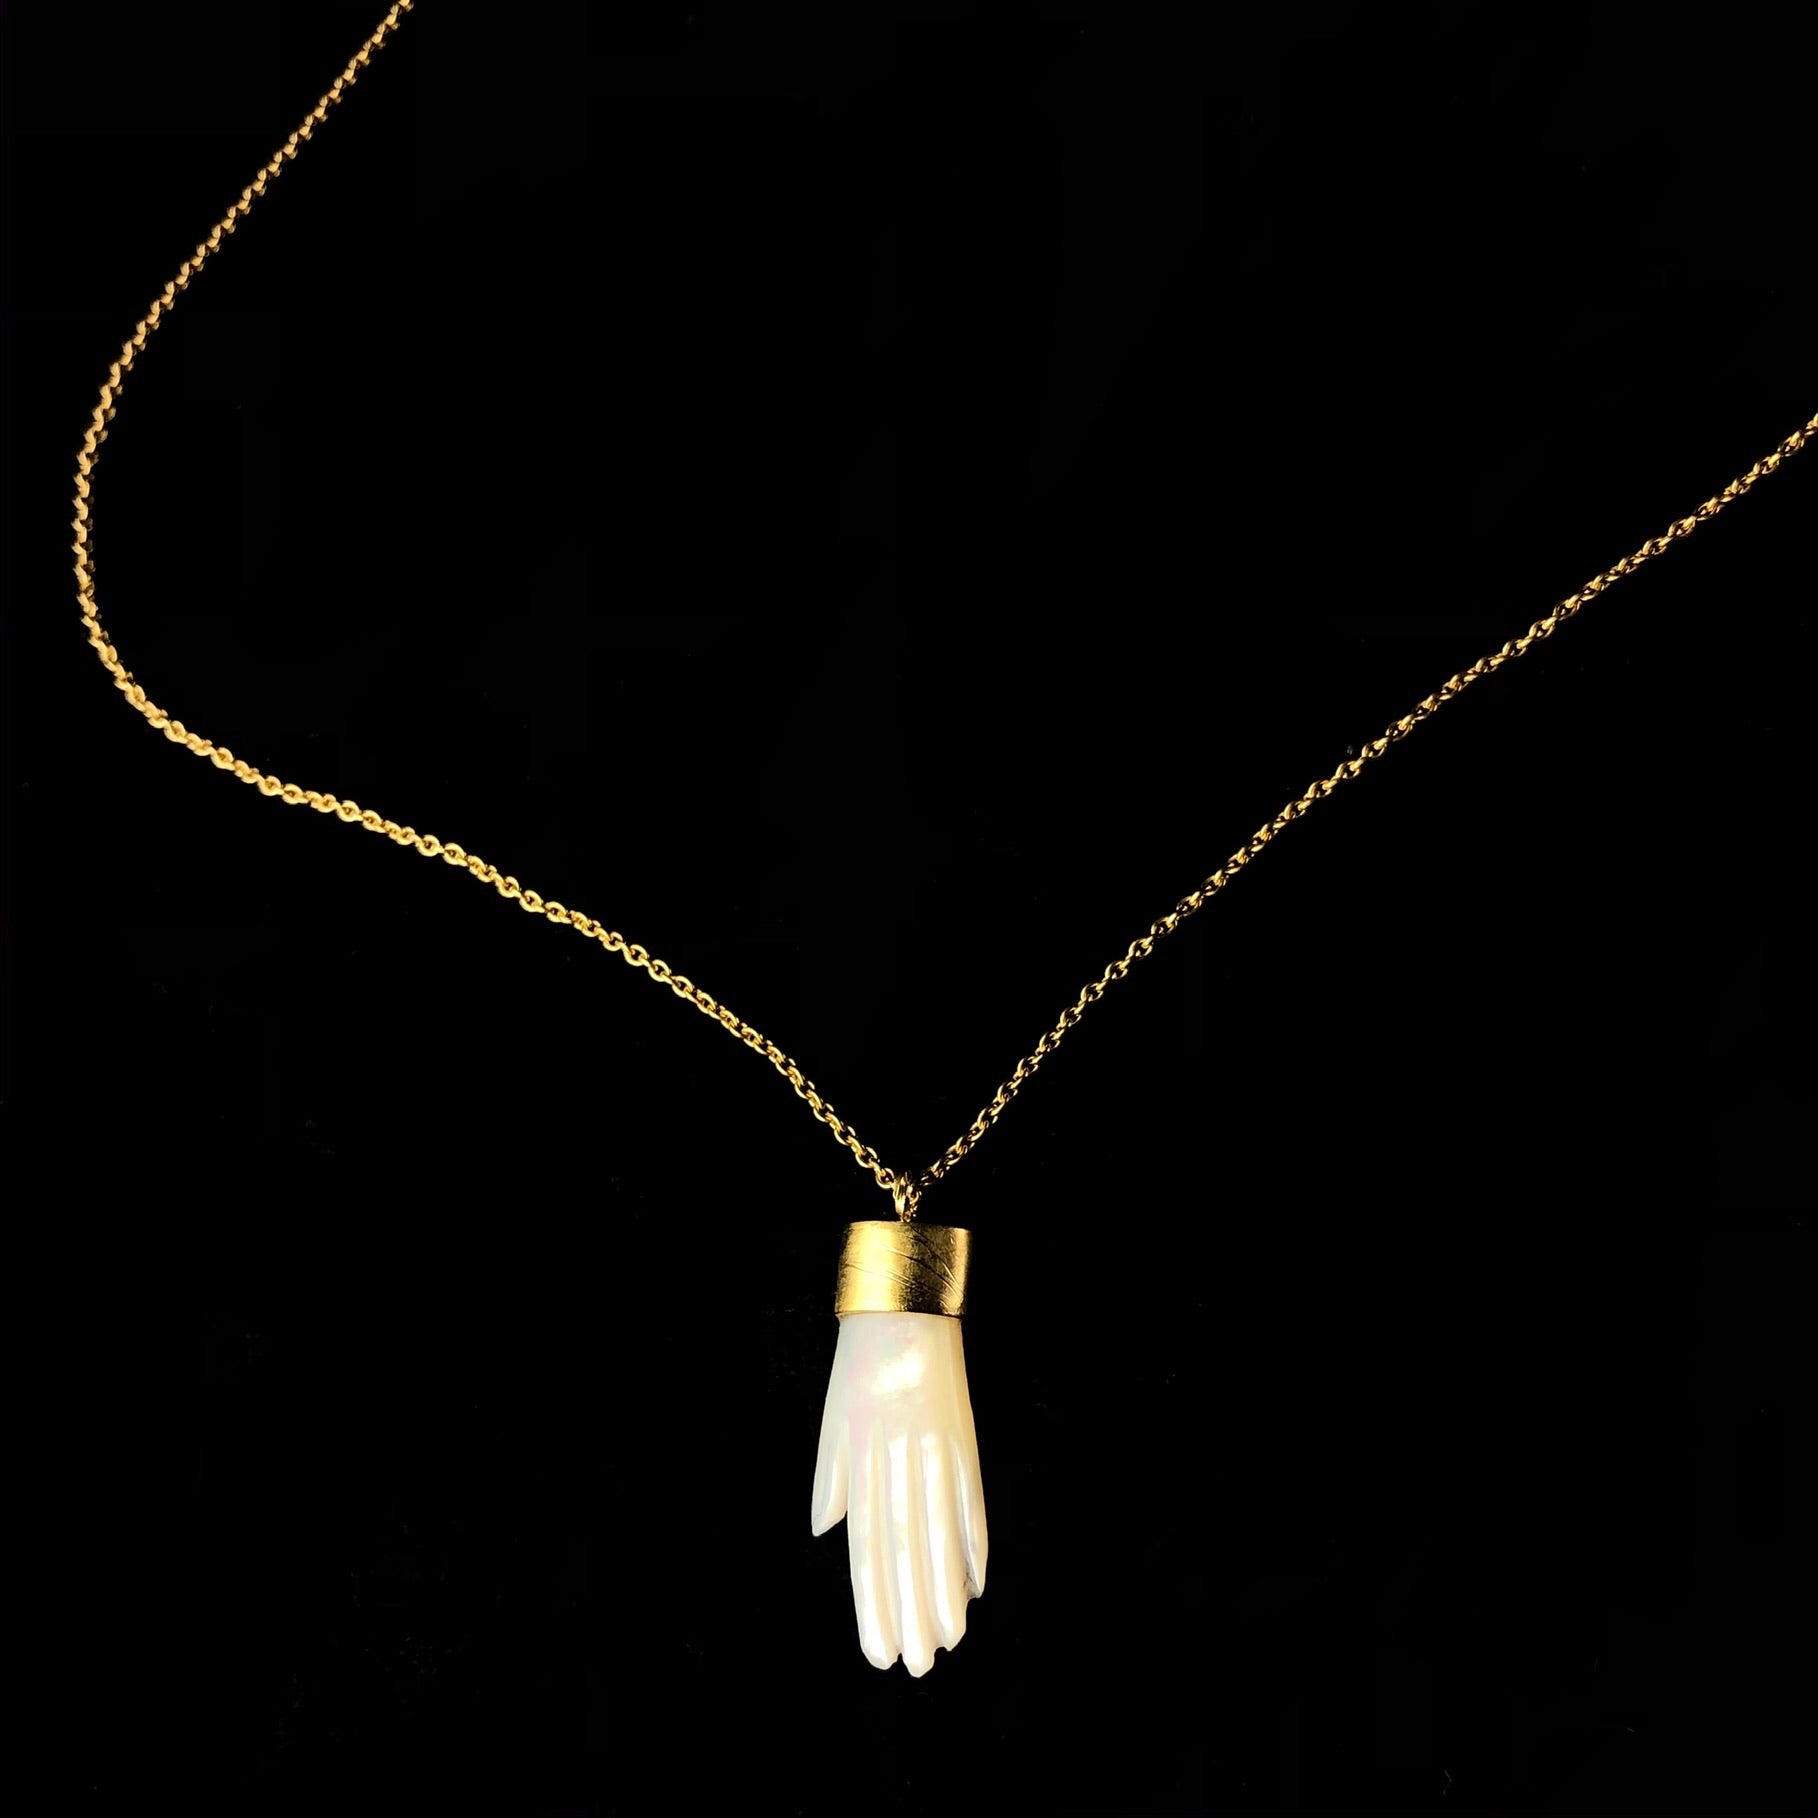 Detail view of White Mother of Pearl Hand charm on chain